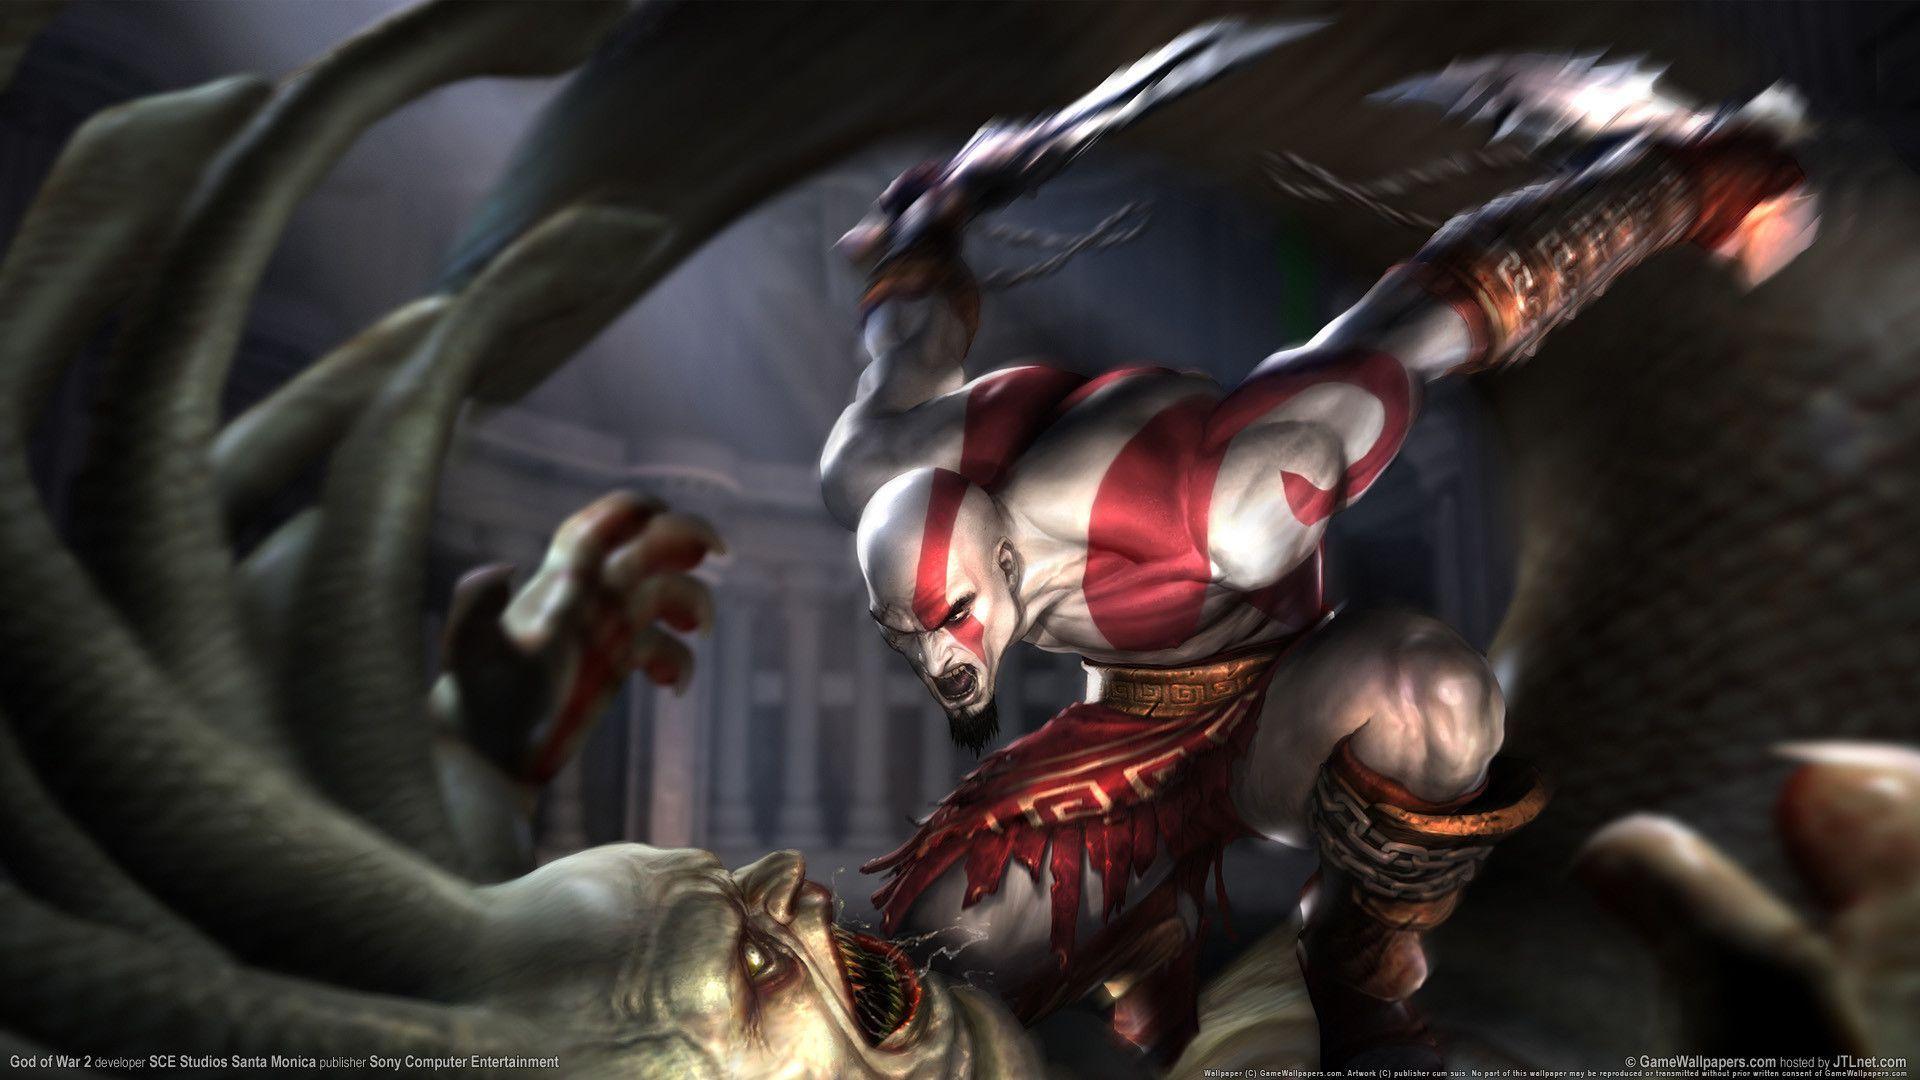 god of war 4 picture Wallpaper HD Image 9483